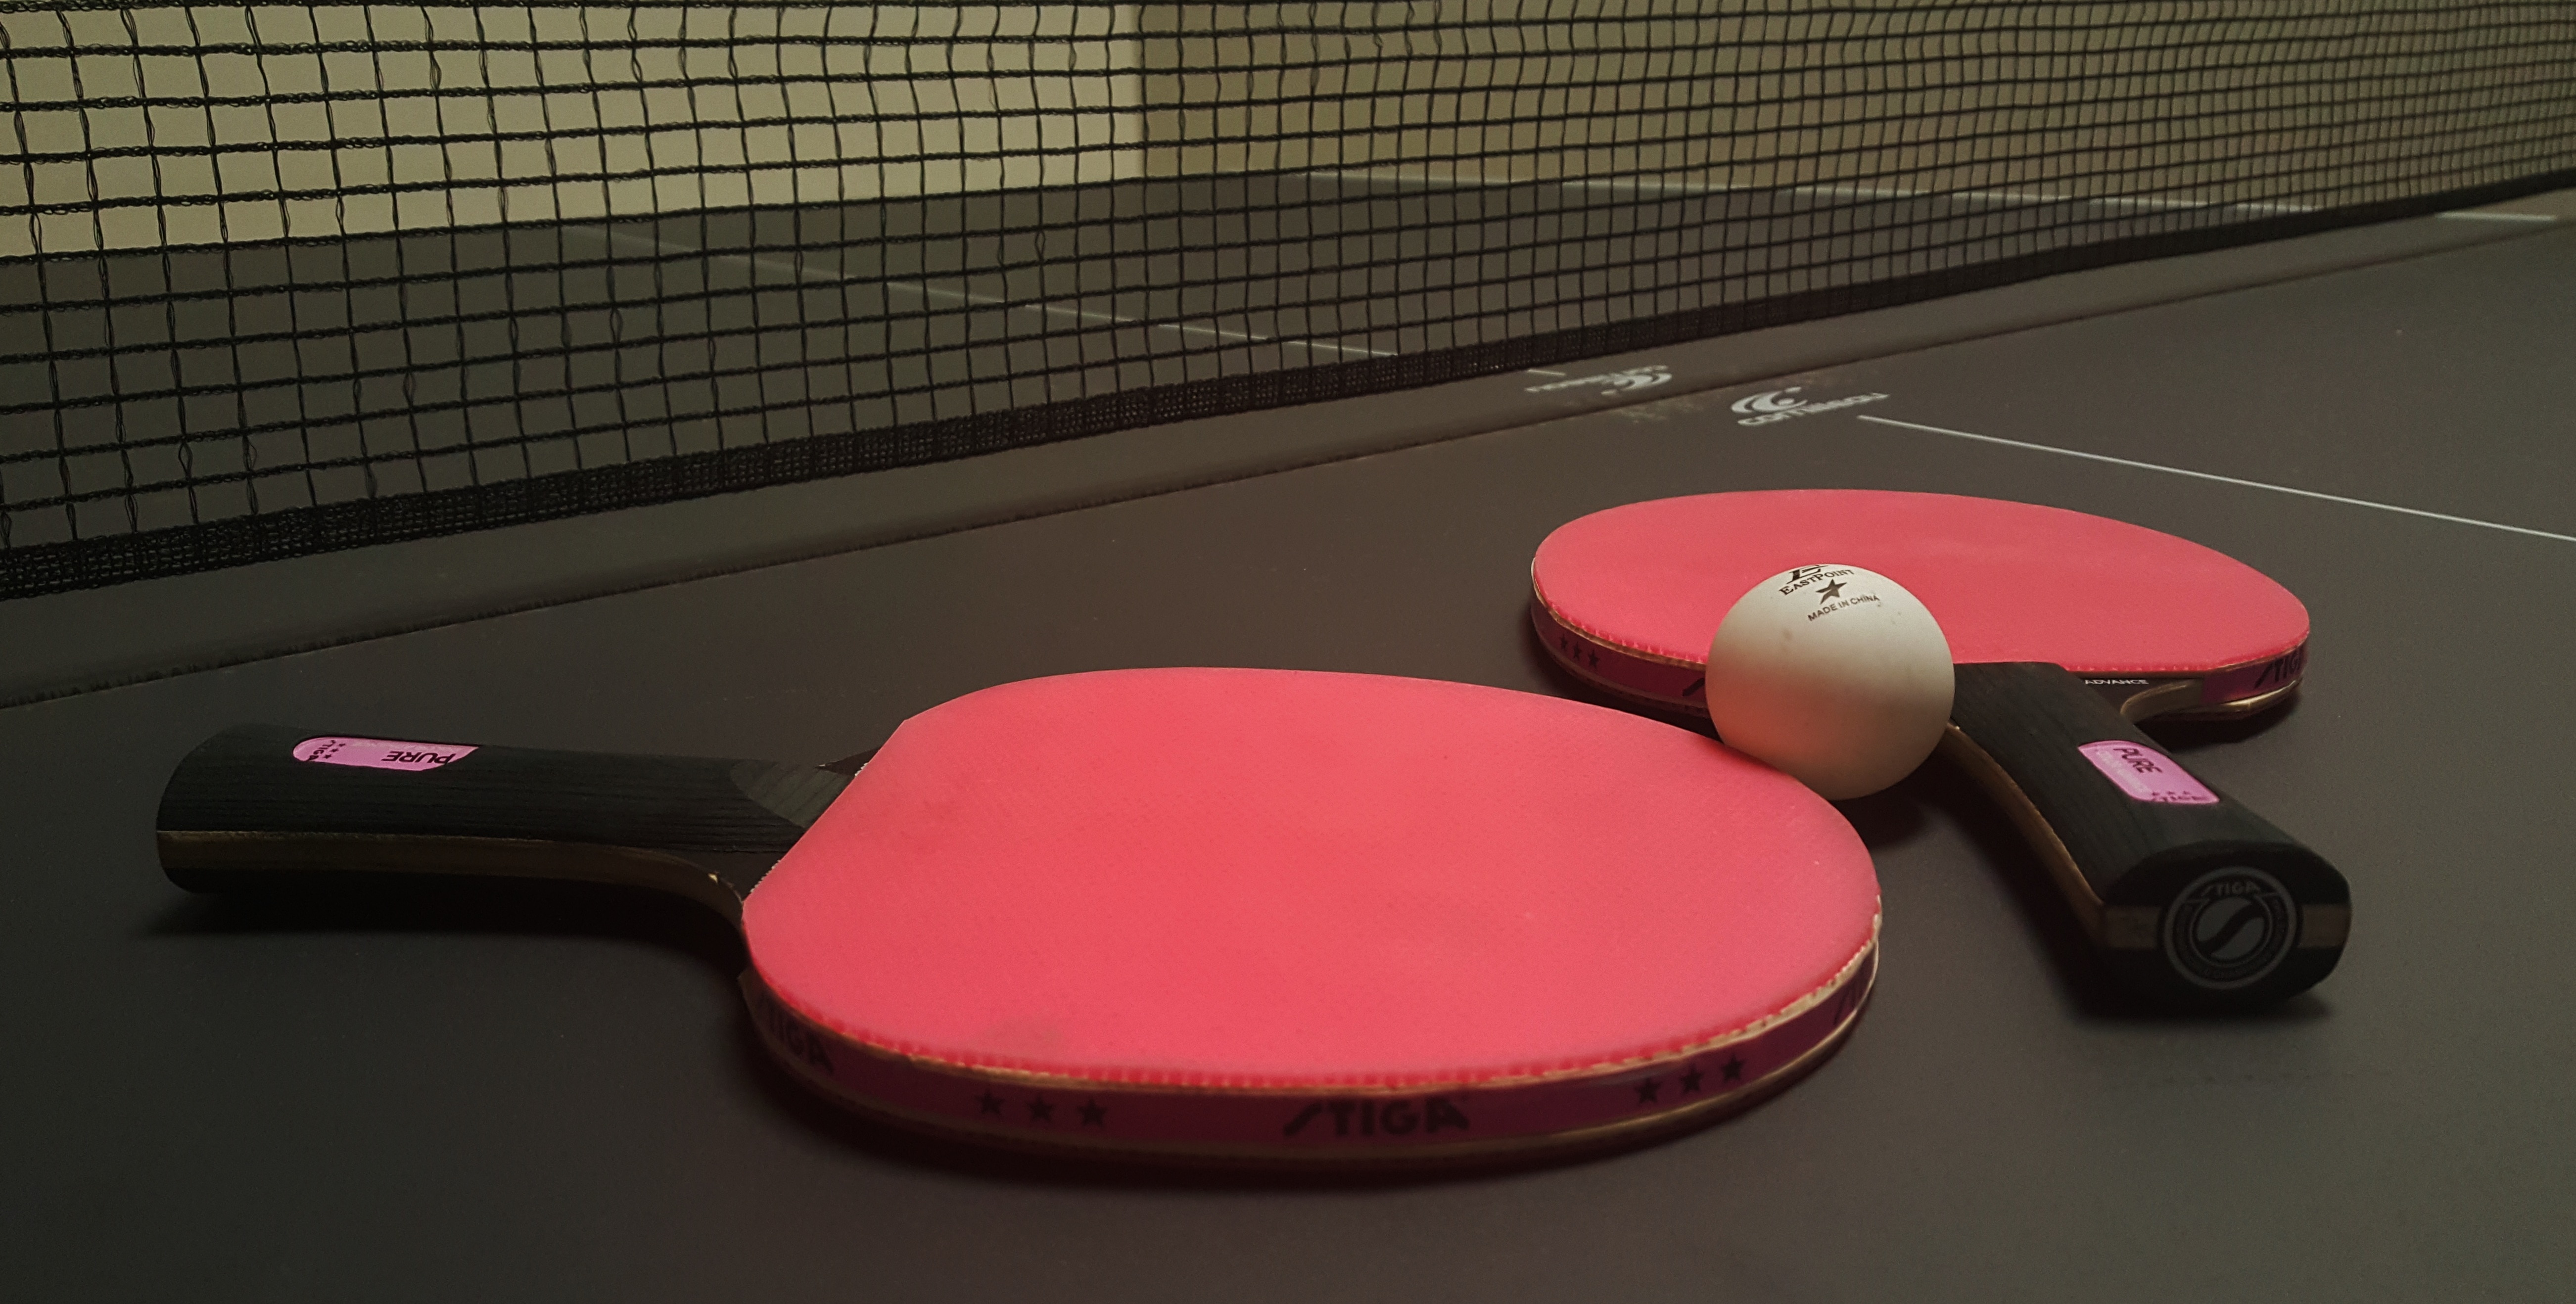 red and black table tennis set